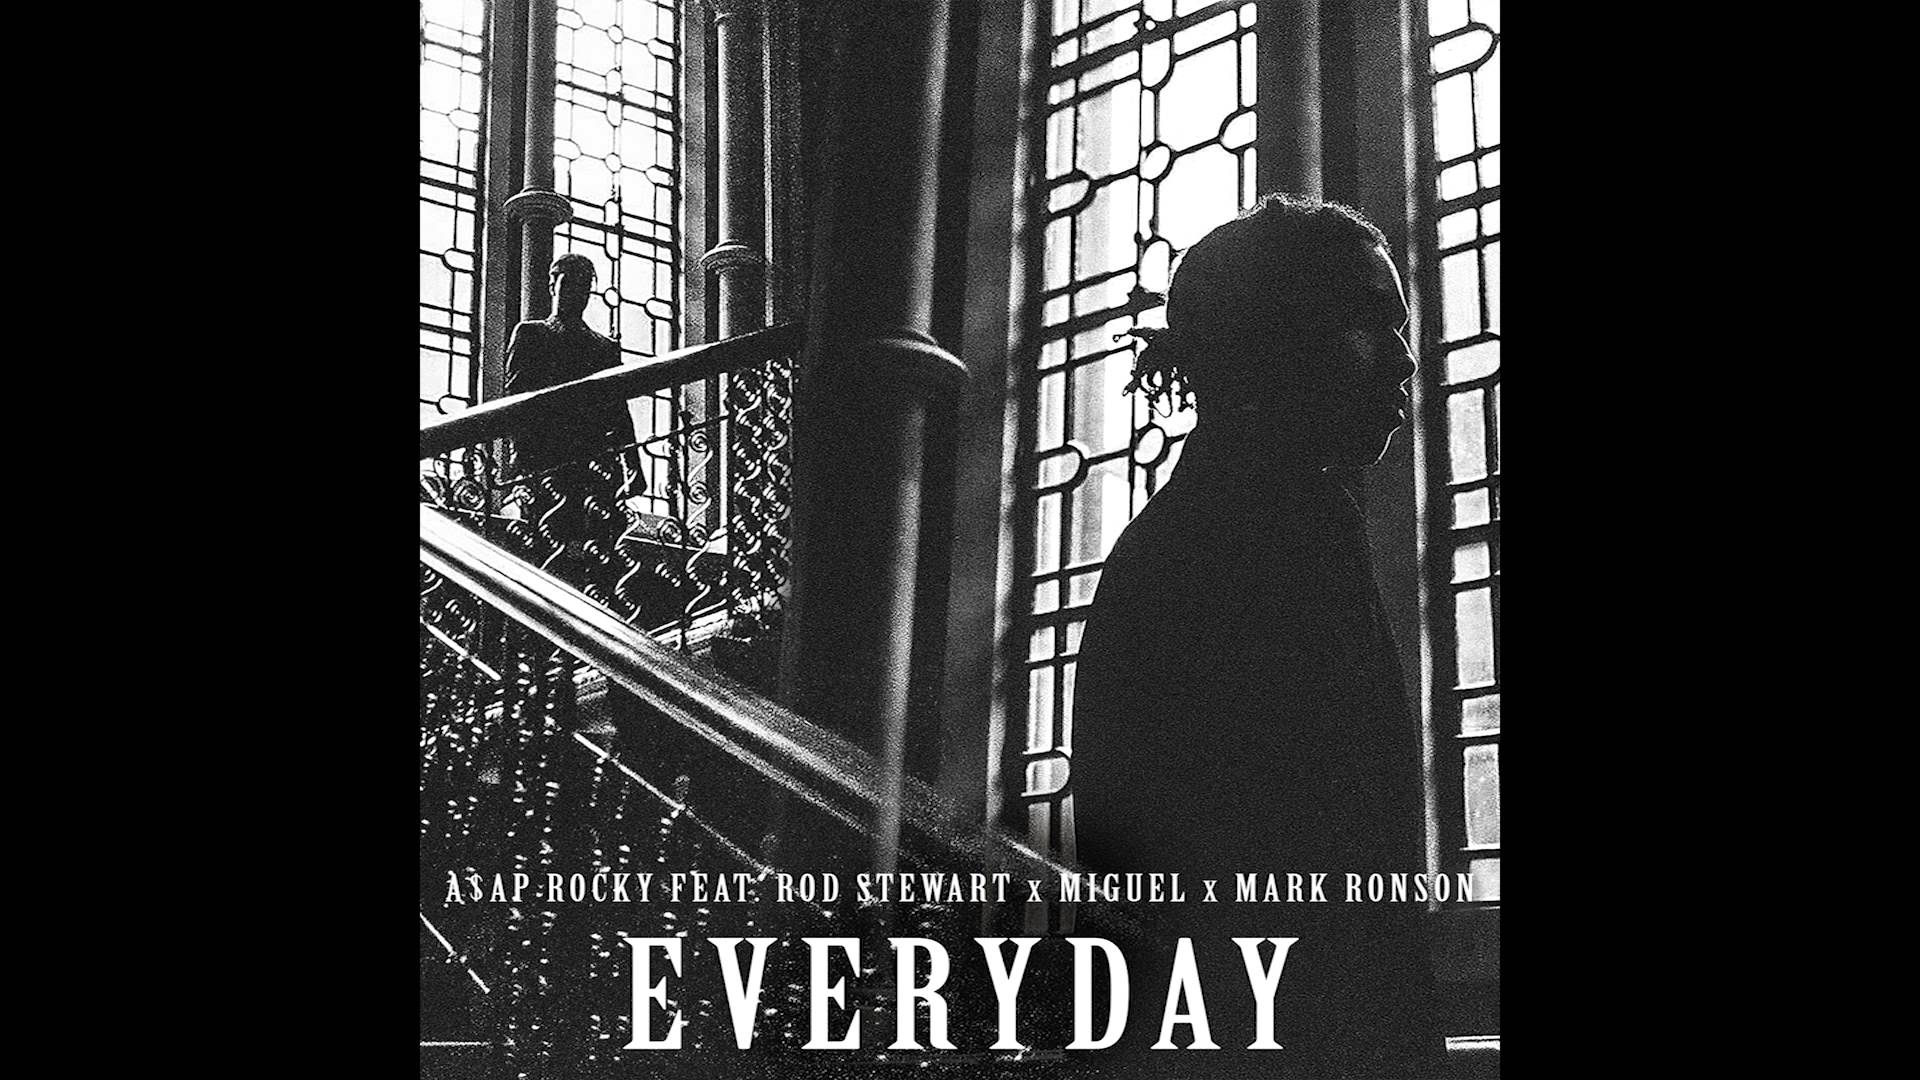 A$AP Rocky ft. Rod Stewart, Miguel, & Mark Ronson – “Everyday” (Audio)